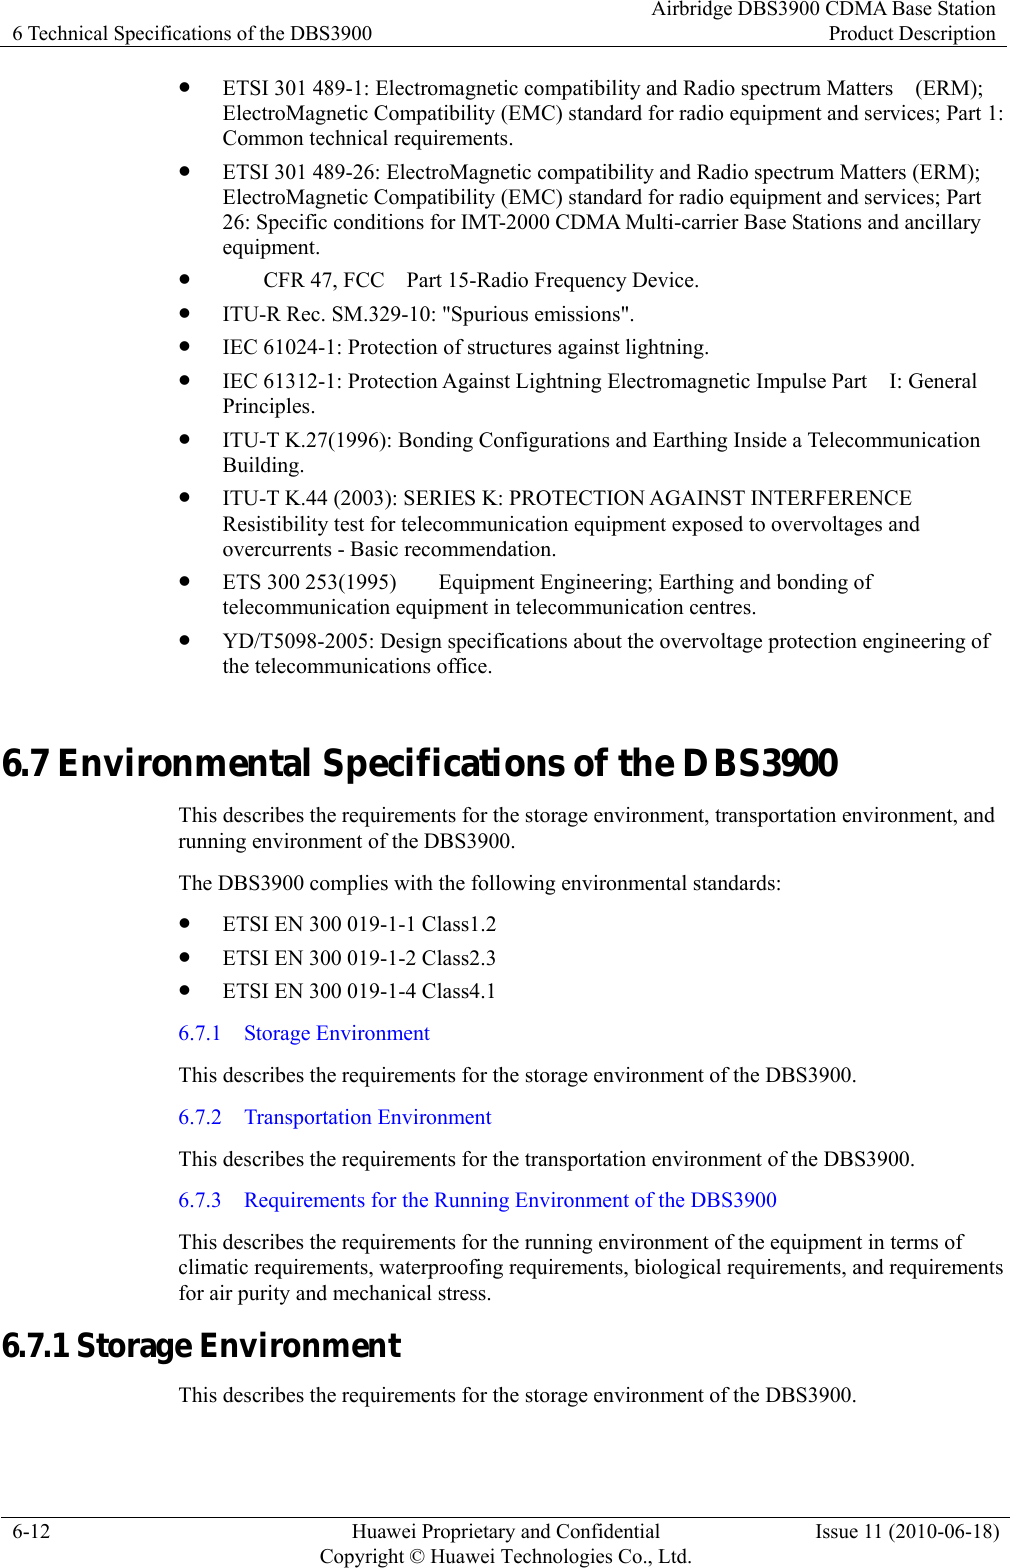 6 Technical Specifications of the DBS3900 Airbridge DBS3900 CDMA Base StationProduct Description 6-12  Huawei Proprietary and Confidential     Copyright © Huawei Technologies Co., Ltd.Issue 11 (2010-06-18) z ETSI 301 489-1: Electromagnetic compatibility and Radio spectrum Matters    (ERM); ElectroMagnetic Compatibility (EMC) standard for radio equipment and services; Part 1: Common technical requirements. z ETSI 301 489-26: ElectroMagnetic compatibility and Radio spectrum Matters (ERM); ElectroMagnetic Compatibility (EMC) standard for radio equipment and services; Part 26: Specific conditions for IMT-2000 CDMA Multi-carrier Base Stations and ancillary equipment. z   CFR 47, FCC    Part 15-Radio Frequency Device. z ITU-R Rec. SM.329-10: &quot;Spurious emissions&quot;. z IEC 61024-1: Protection of structures against lightning. z IEC 61312-1: Protection Against Lightning Electromagnetic Impulse Part    I: General Principles. z ITU-T K.27(1996): Bonding Configurations and Earthing Inside a Telecommunication Building. z ITU-T K.44 (2003): SERIES K: PROTECTION AGAINST INTERFERENCE Resistibility test for telecommunication equipment exposed to overvoltages and overcurrents - Basic recommendation. z ETS 300 253(1995)  Equipment Engineering; Earthing and bonding of telecommunication equipment in telecommunication centres. z YD/T5098-2005: Design specifications about the overvoltage protection engineering of the telecommunications office. 6.7 Environmental Specifications of the DBS3900 This describes the requirements for the storage environment, transportation environment, and running environment of the DBS3900. The DBS3900 complies with the following environmental standards: z ETSI EN 300 019-1-1 Class1.2 z ETSI EN 300 019-1-2 Class2.3 z ETSI EN 300 019-1-4 Class4.1 6.7.1  Storage Environment This describes the requirements for the storage environment of the DBS3900. 6.7.2  Transportation Environment This describes the requirements for the transportation environment of the DBS3900. 6.7.3    Requirements for the Running Environment of the DBS3900 This describes the requirements for the running environment of the equipment in terms of climatic requirements, waterproofing requirements, biological requirements, and requirements for air purity and mechanical stress. 6.7.1 Storage Environment This describes the requirements for the storage environment of the DBS3900. 